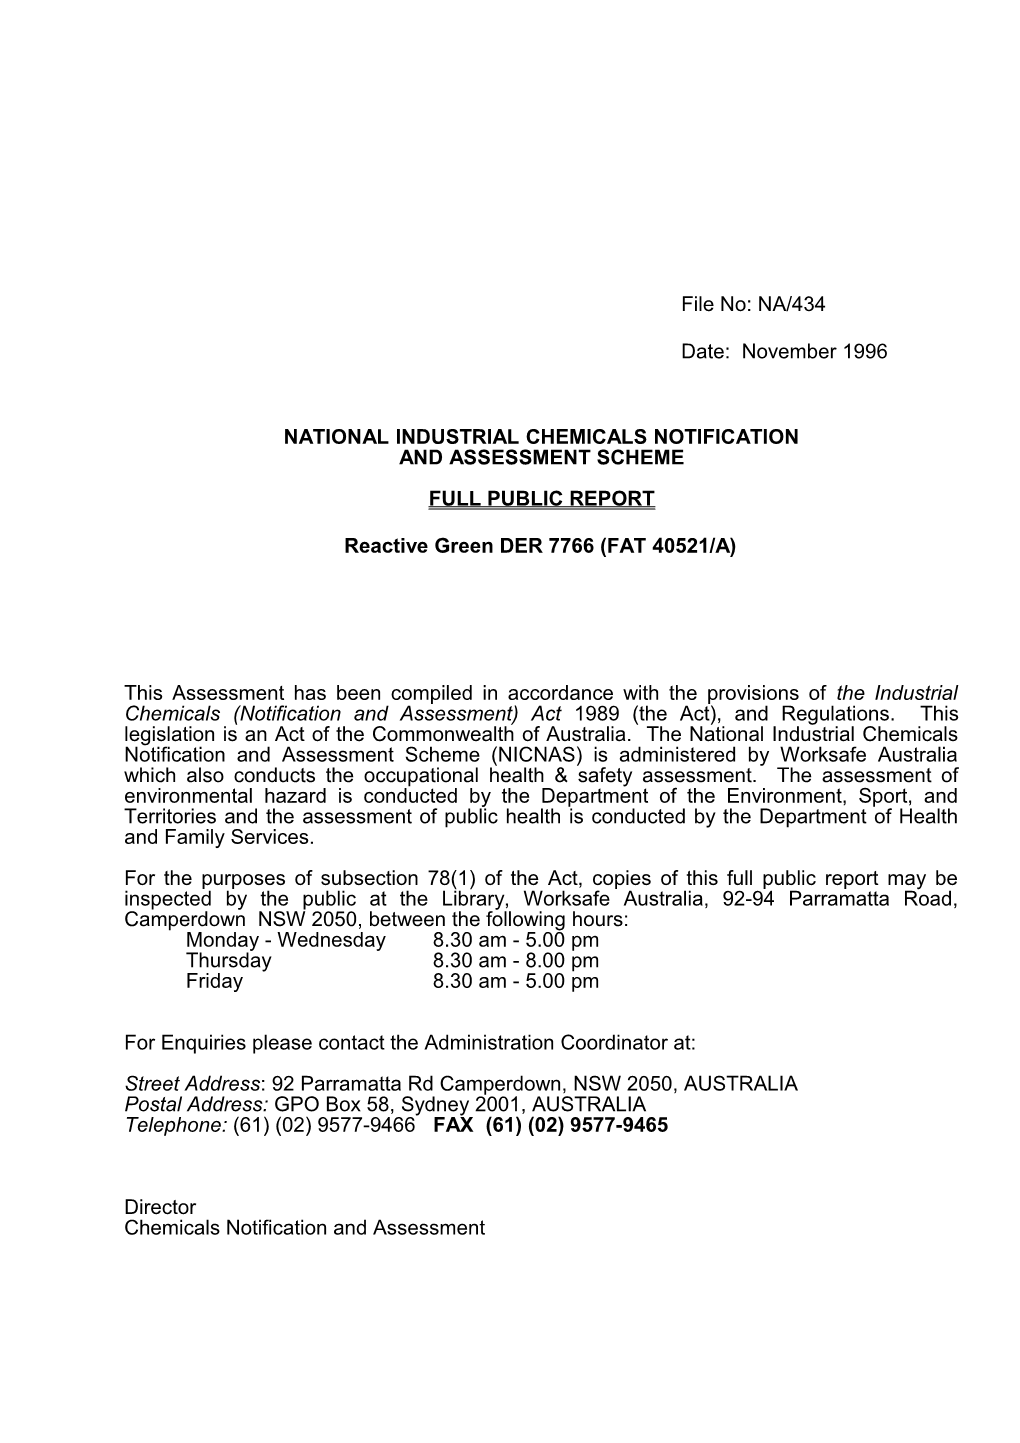 National Industrial Chemicals Notification s7